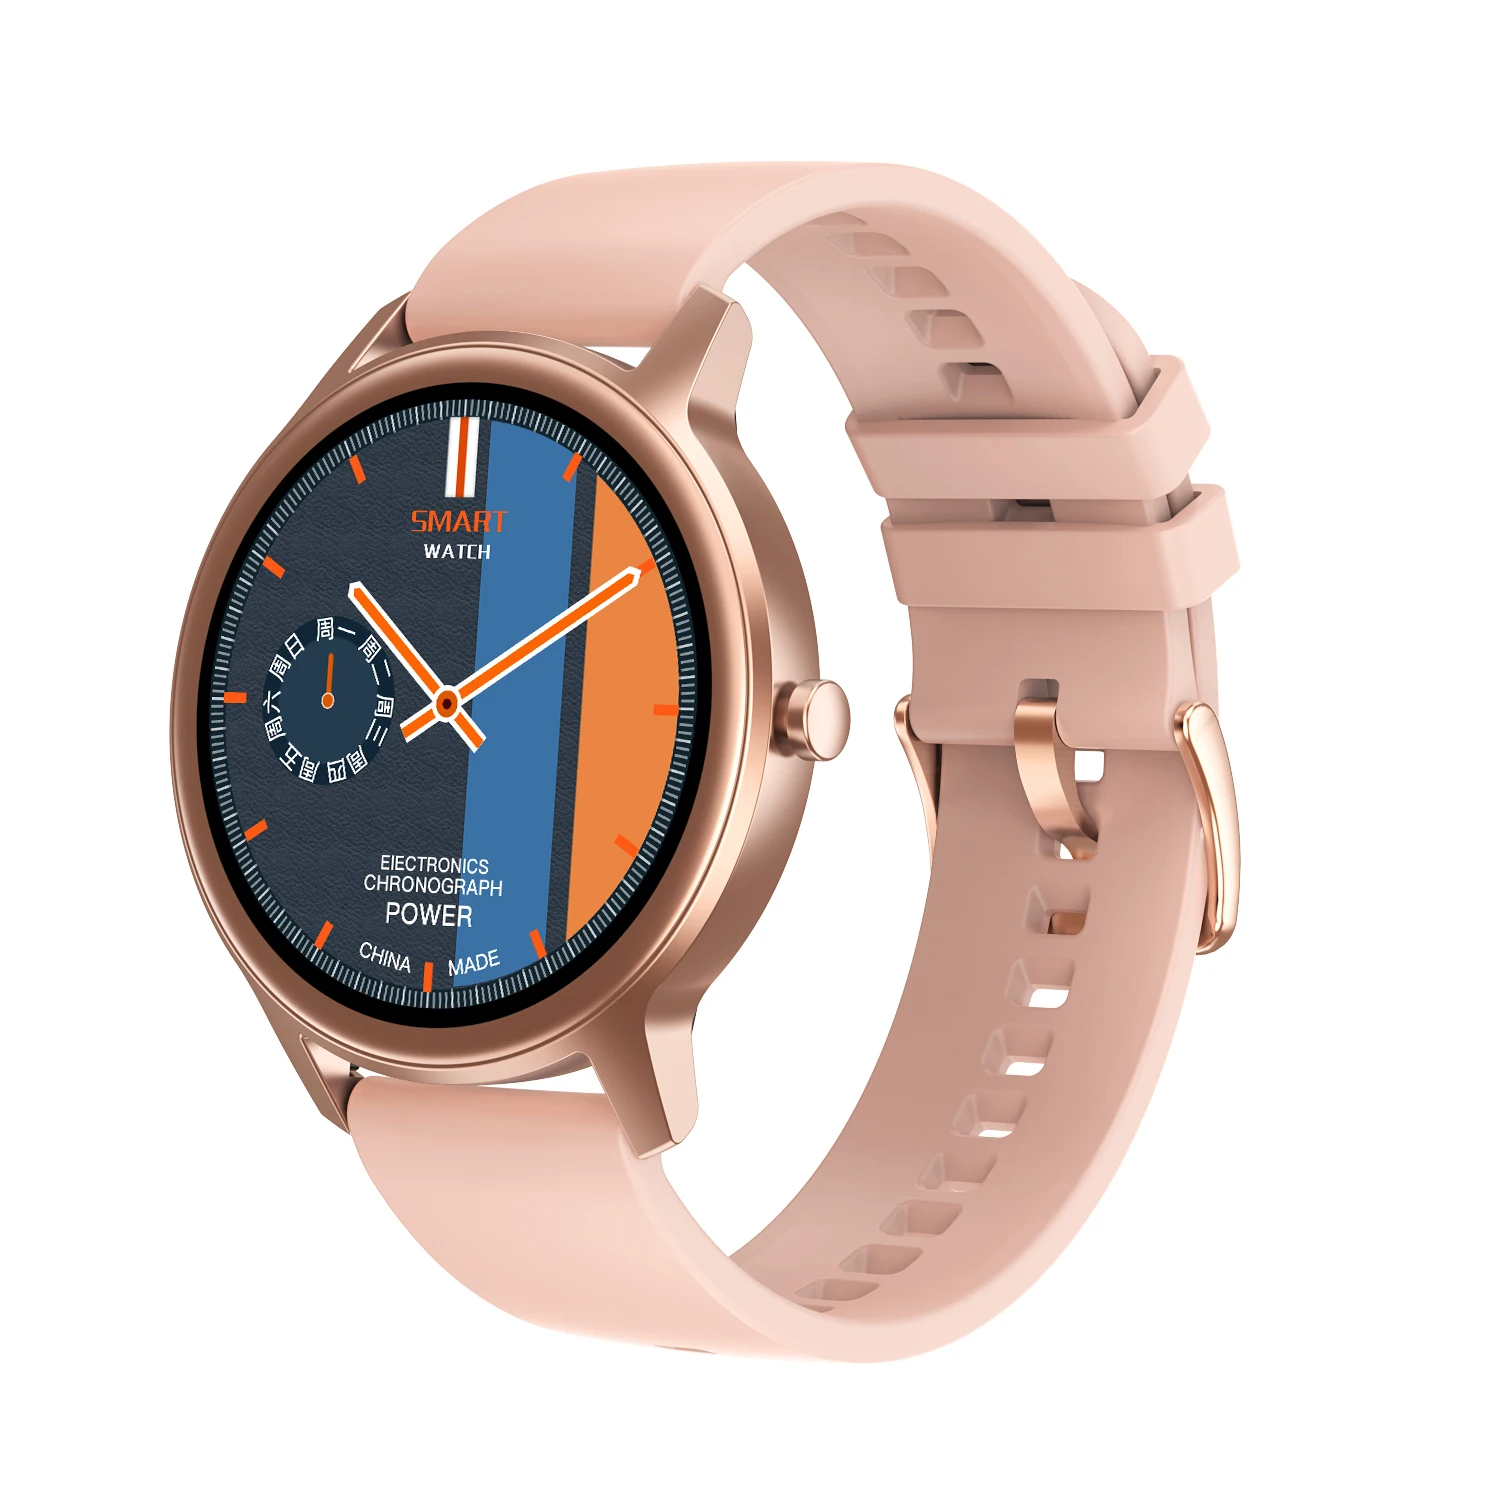 Hot new products Multifunctional language watch Touch DT56 screen smart watch Smart watch lady